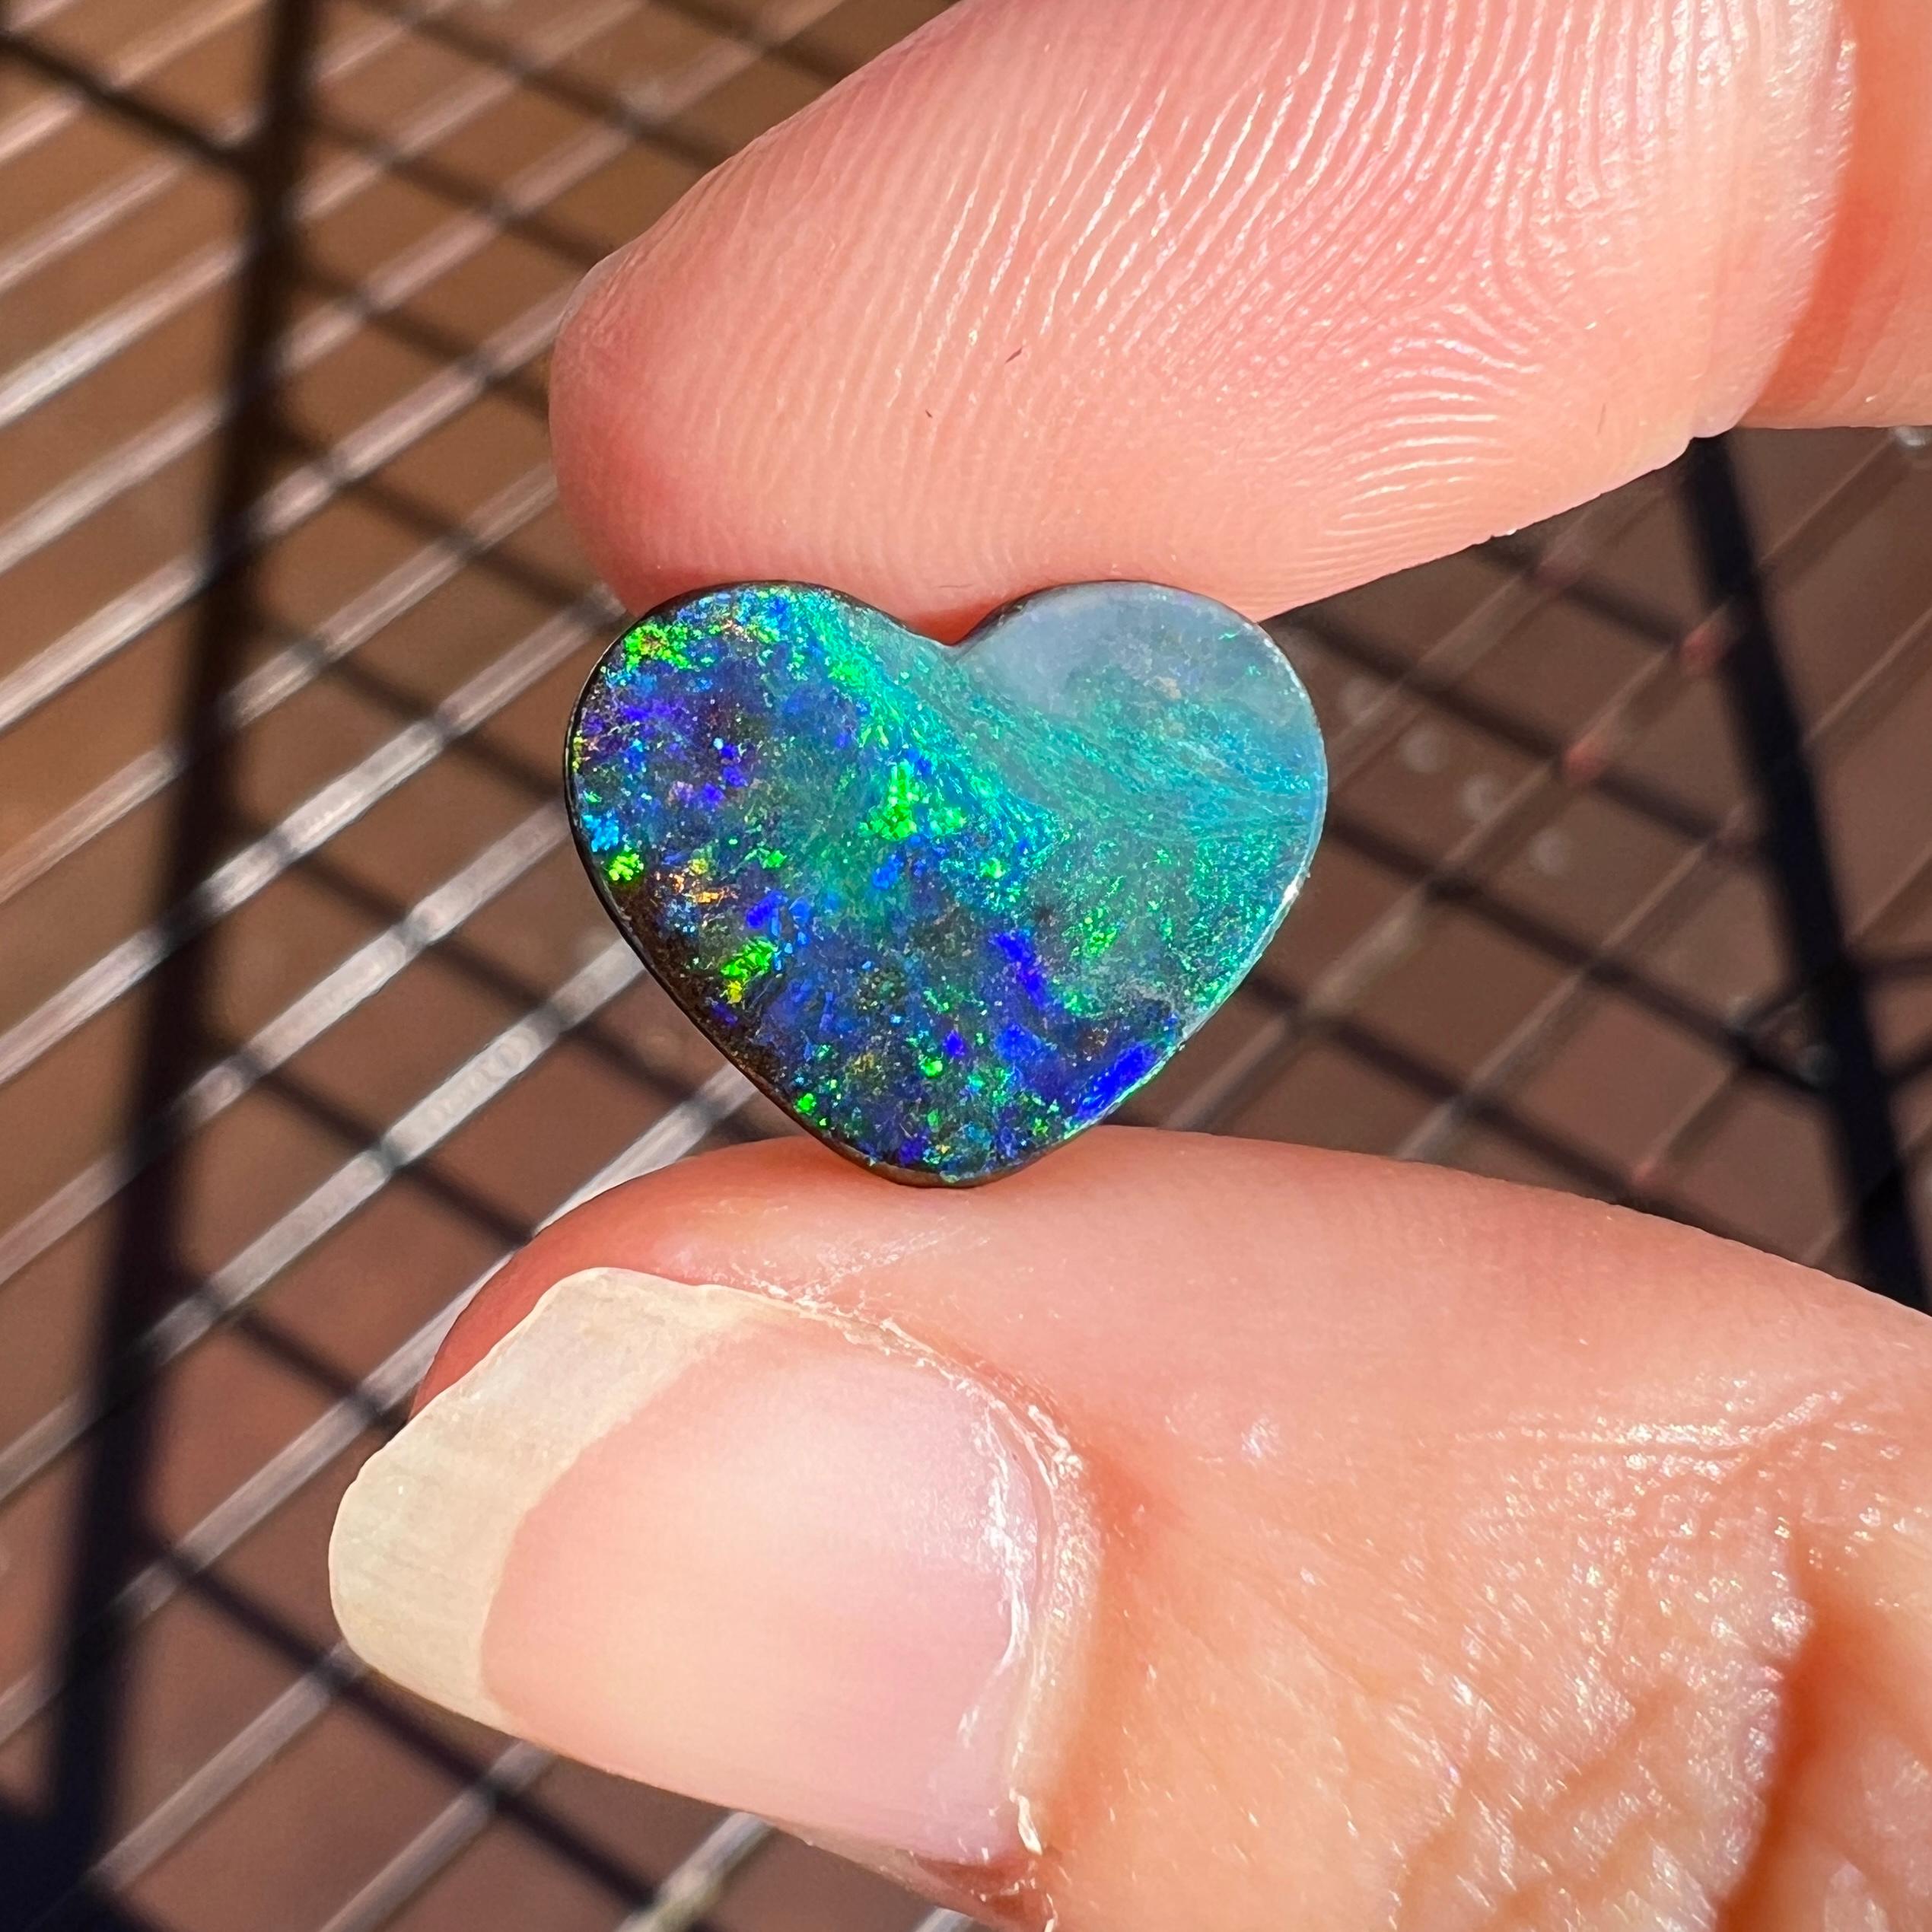 Introducing our exquisite black boulder heart opal! This rare 4.40 Ct Australian black boulder opal was mined by Sue Cooper at her Yaraka opal mine in western Queensland, Australia in 2021. Sue processed the rough opal herself and selected to cut